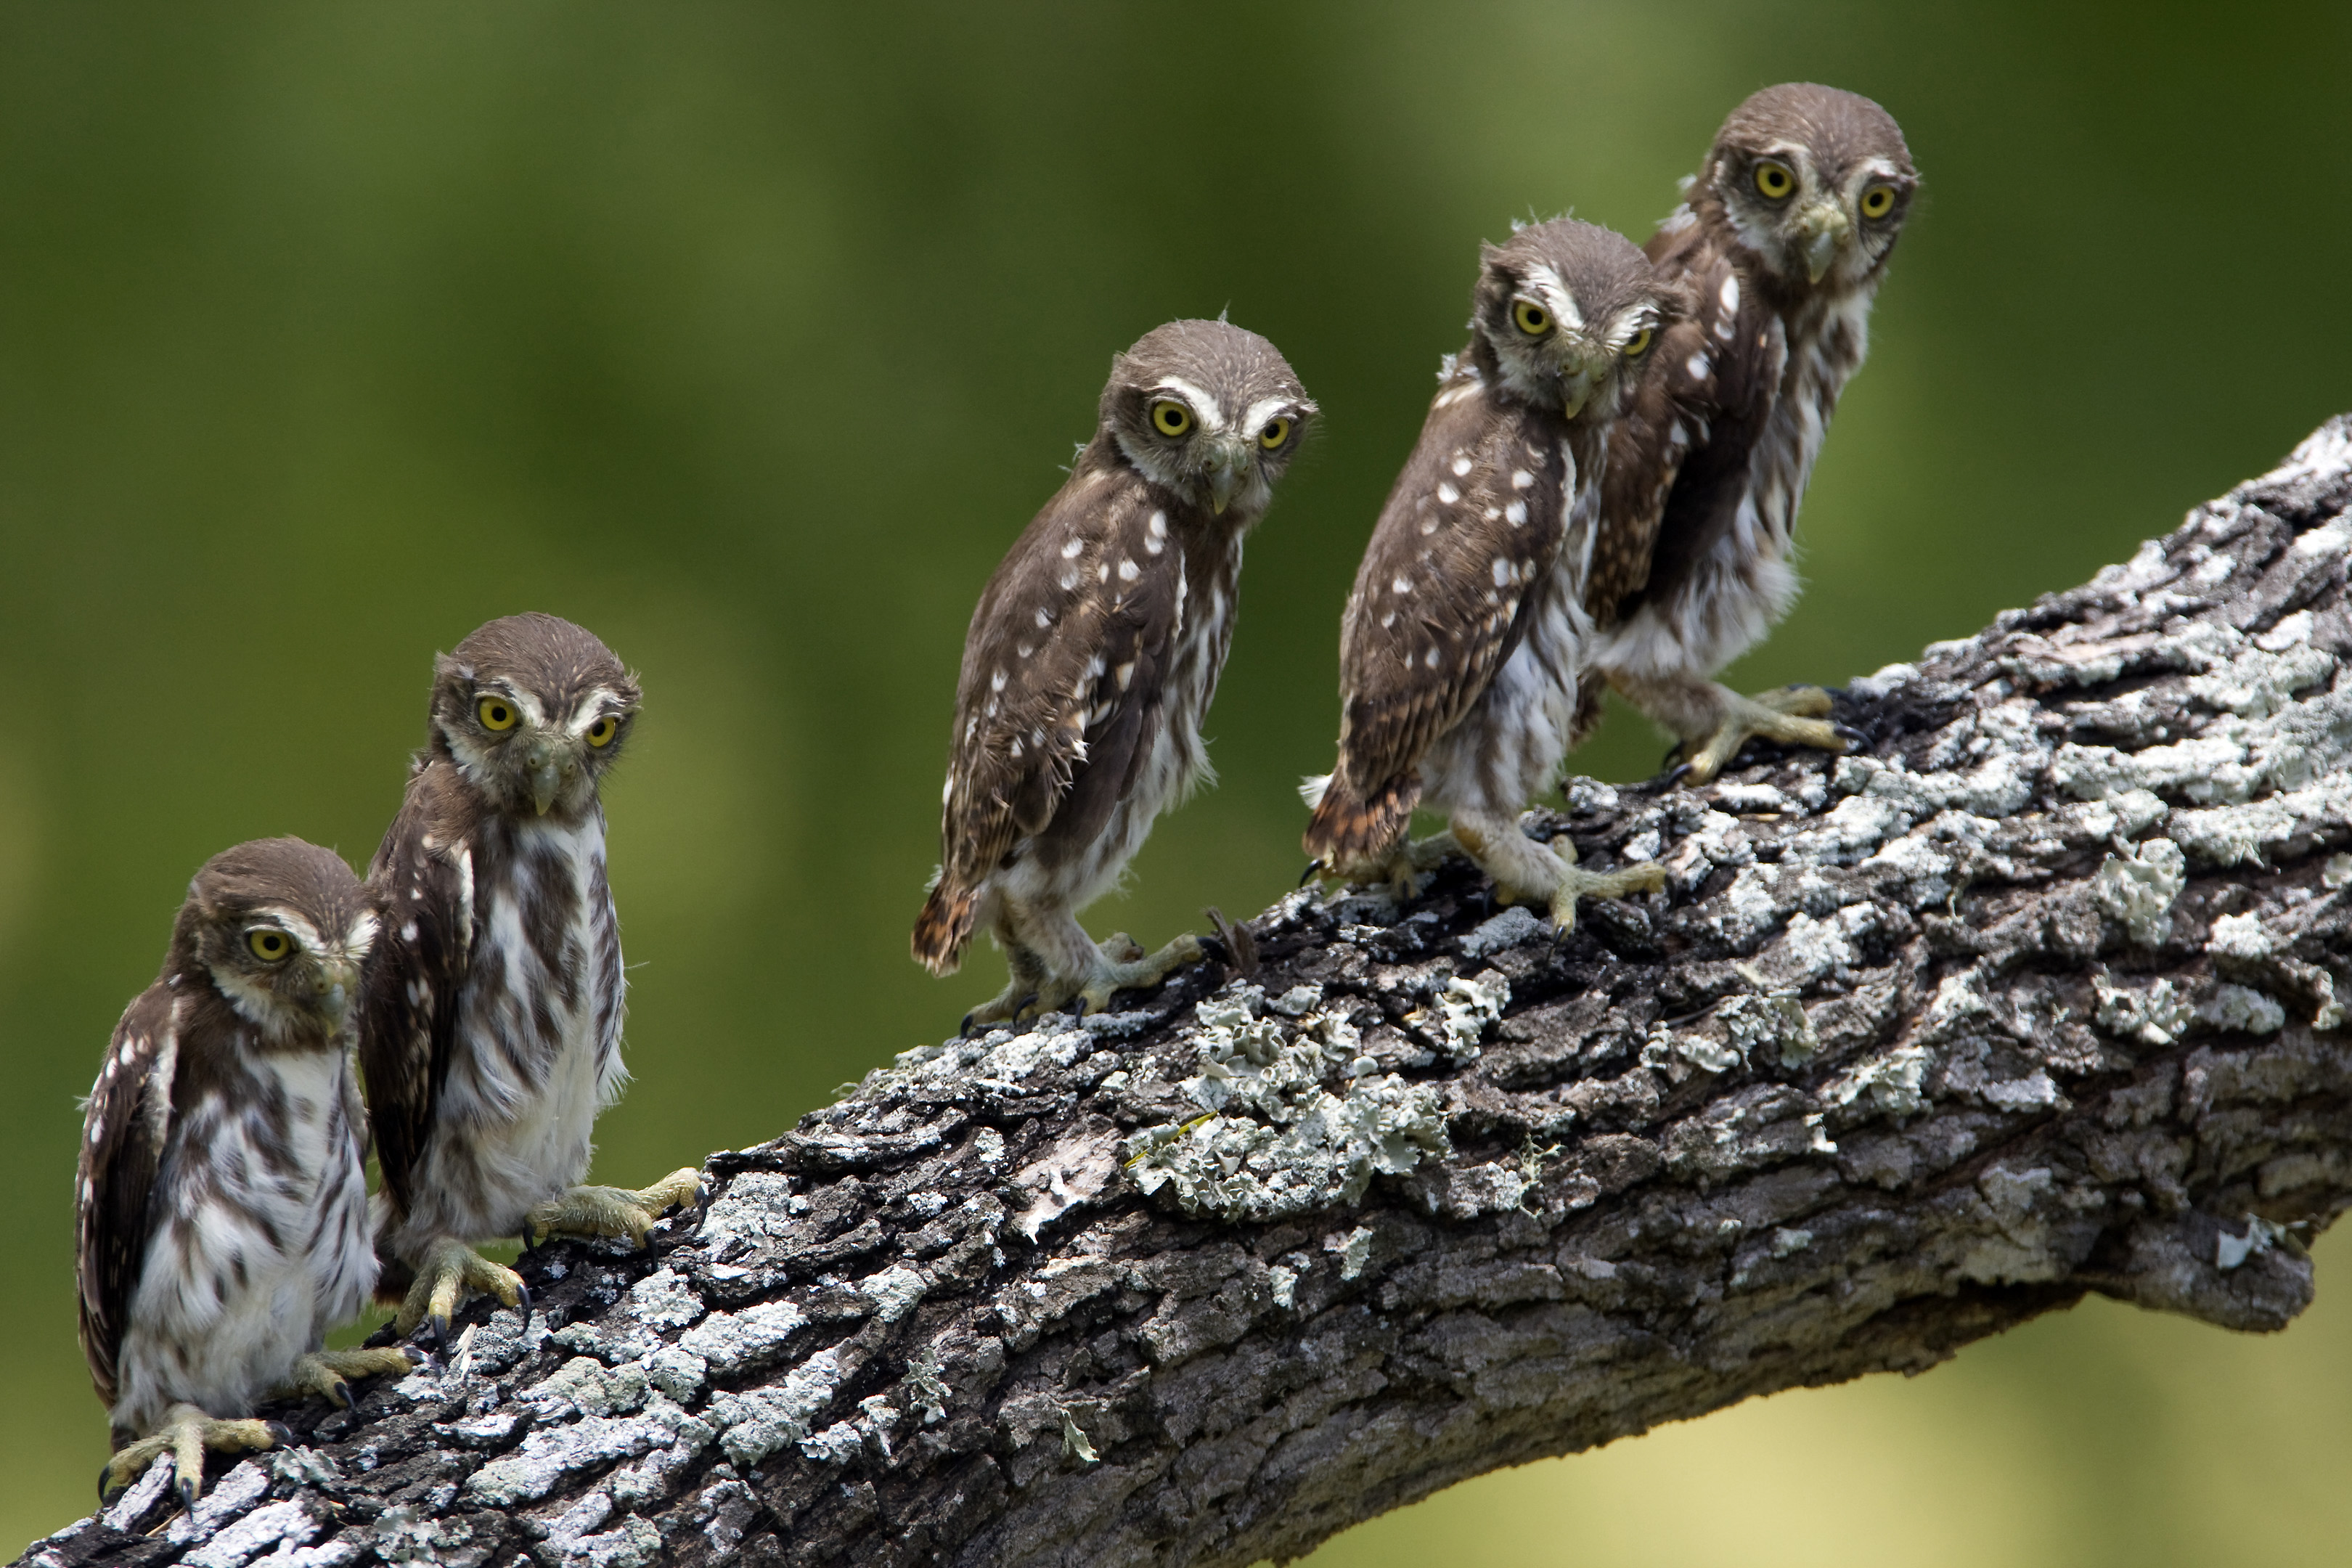 Owl, woodpecker photo exhibit tells of symbiosis, conservation at ...